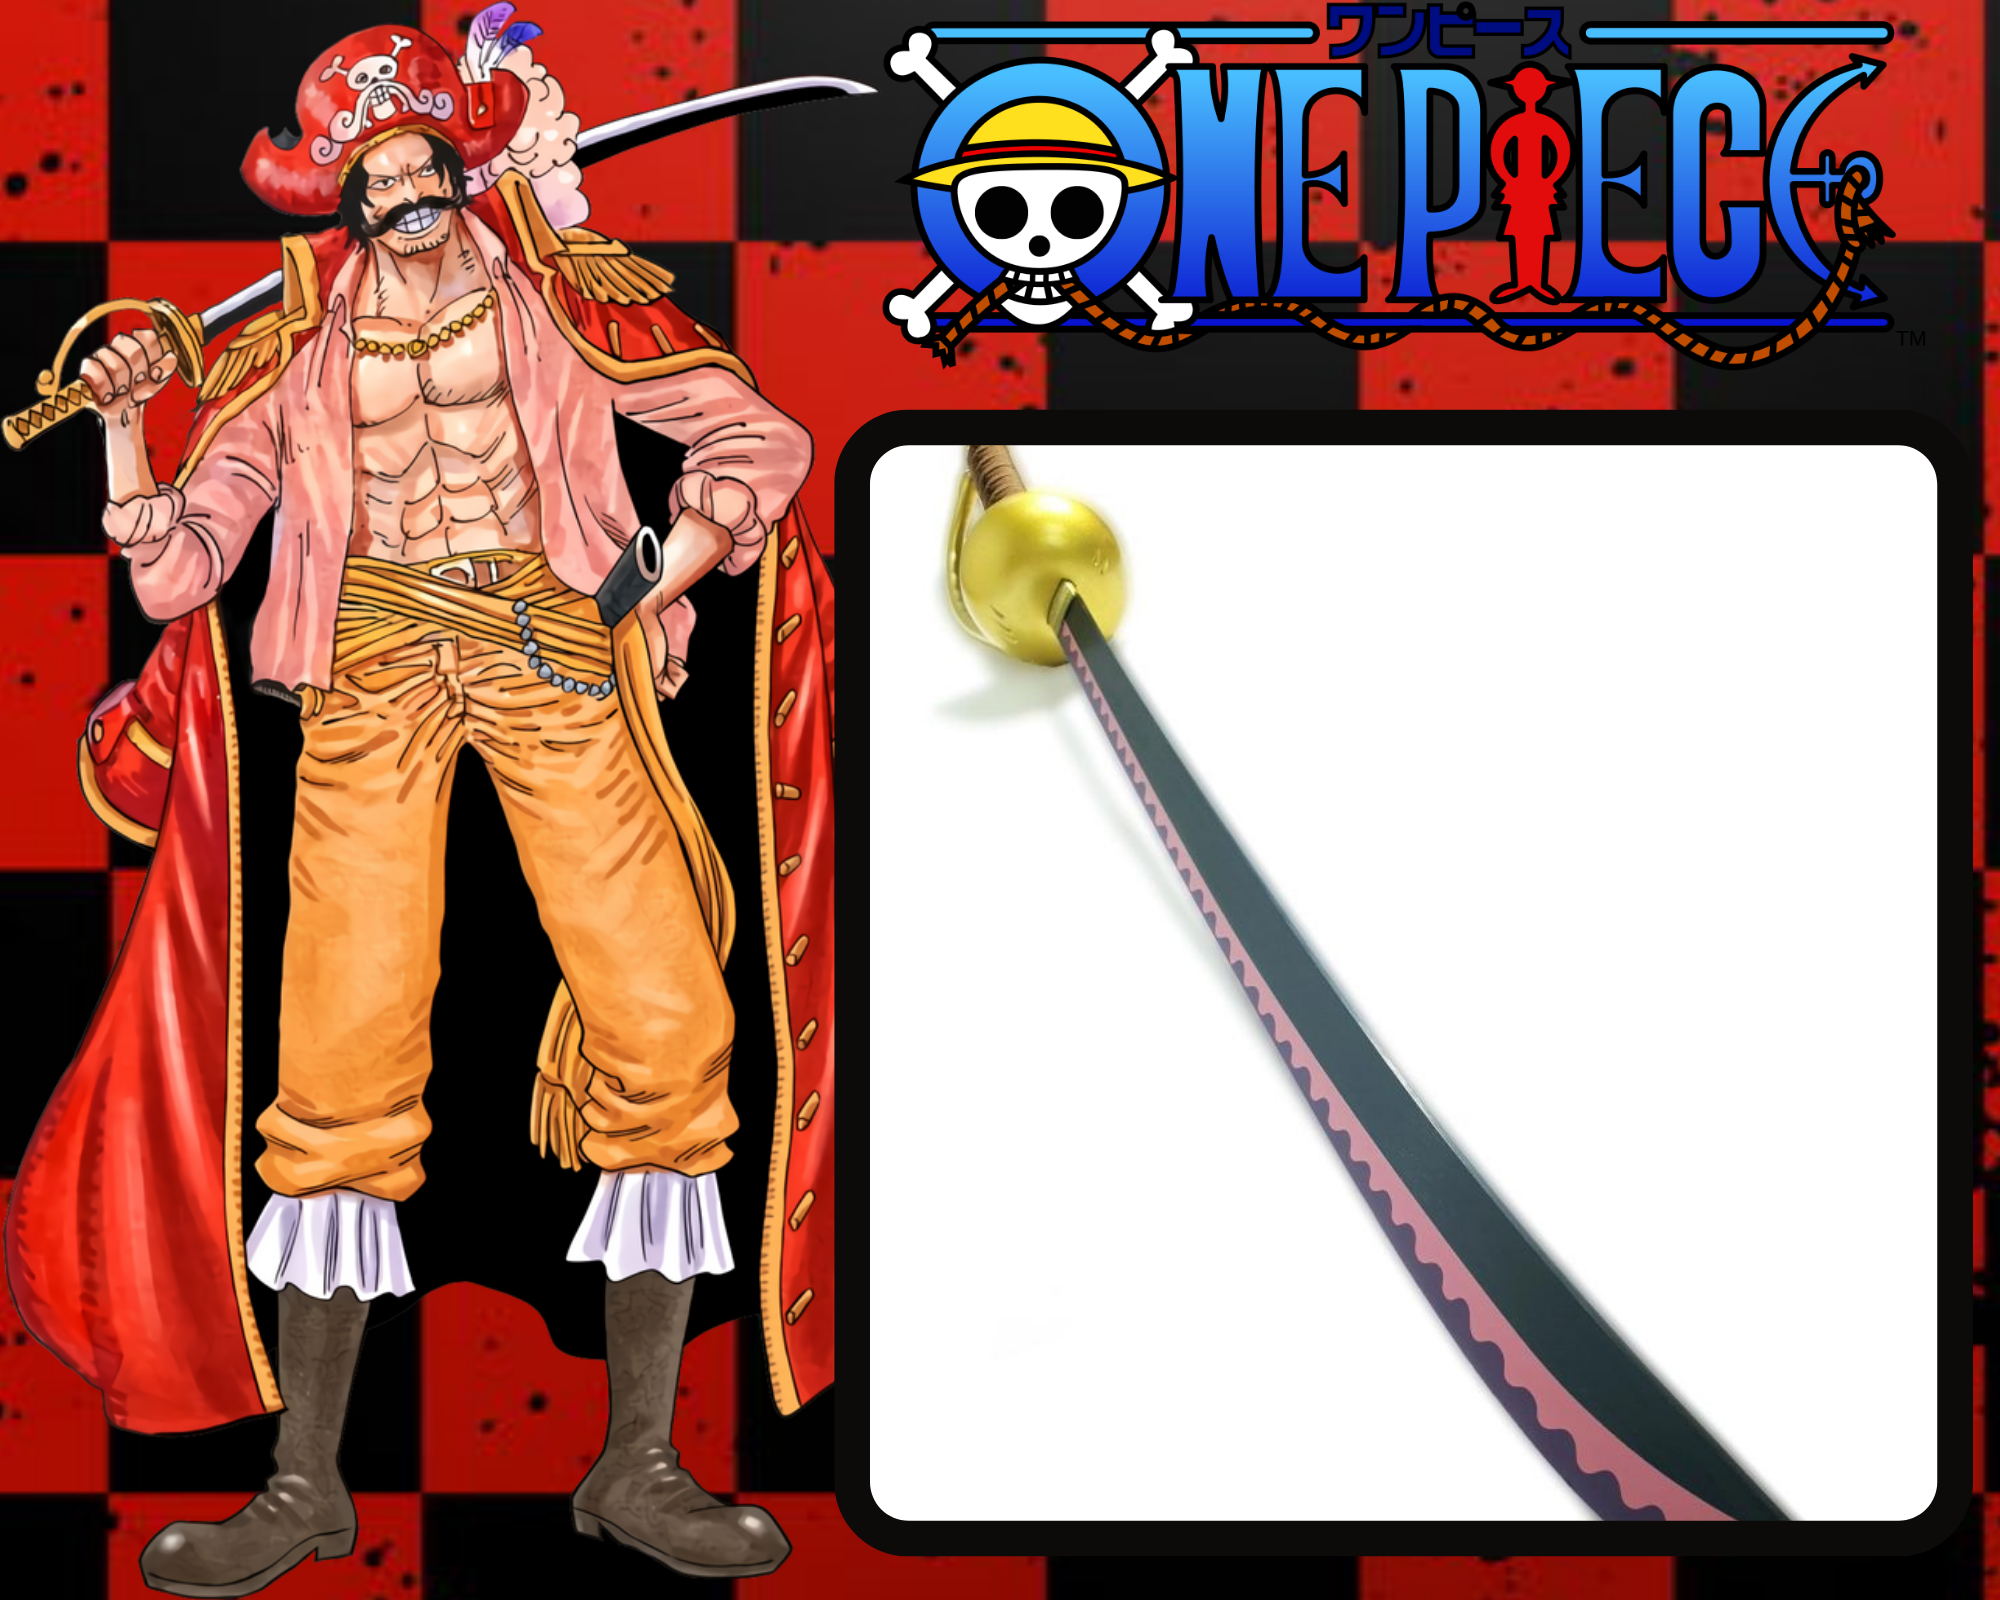 GOLD ROGER SWORD ONE PIECE